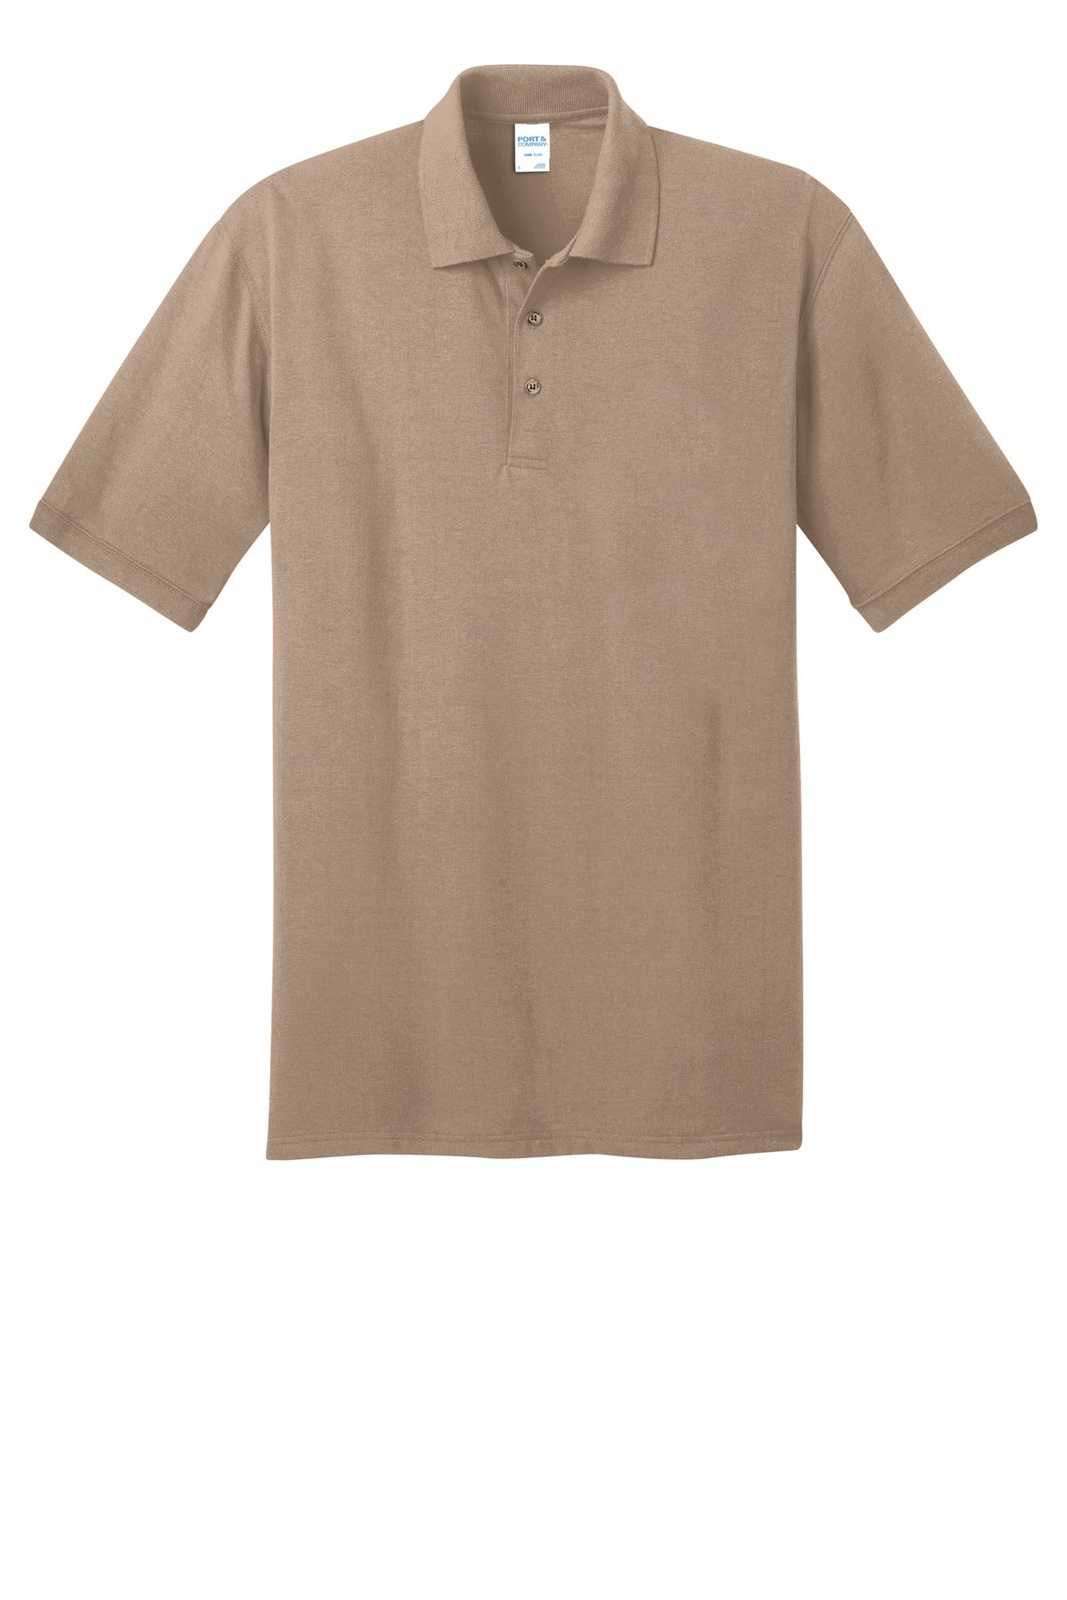 Port &amp; Company KP55T Tall Core Blend Jersey Knit Polo - Sand - HIT a Double - 2